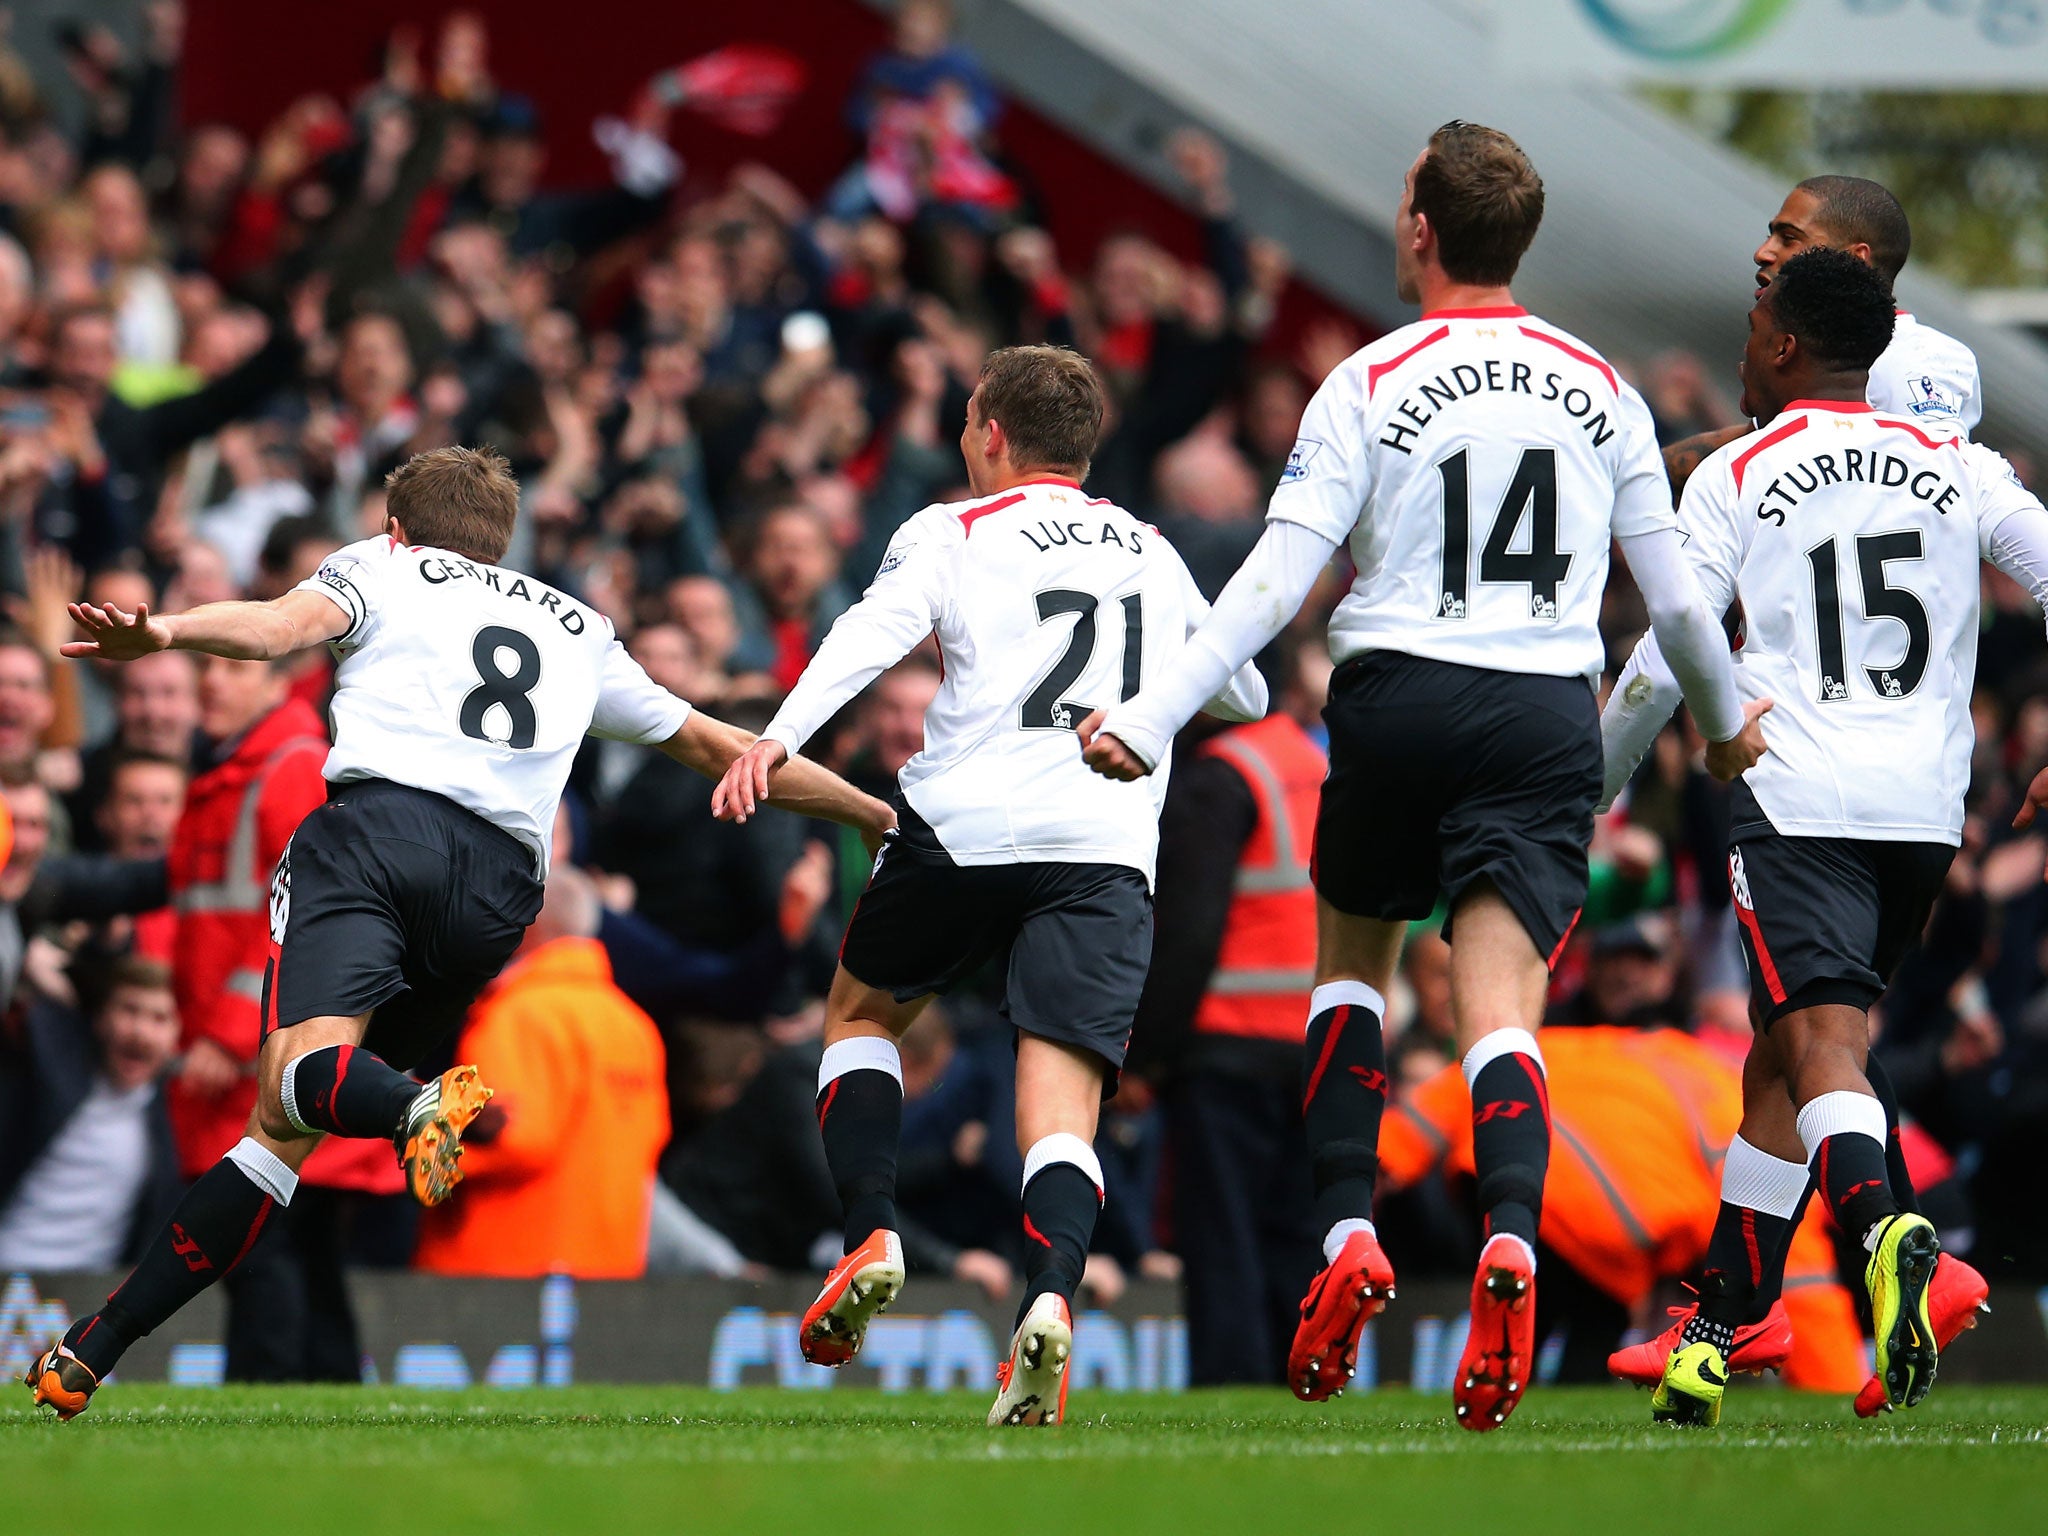 Steven Gerard leads Liverpool's celebration after scoring his second penalty